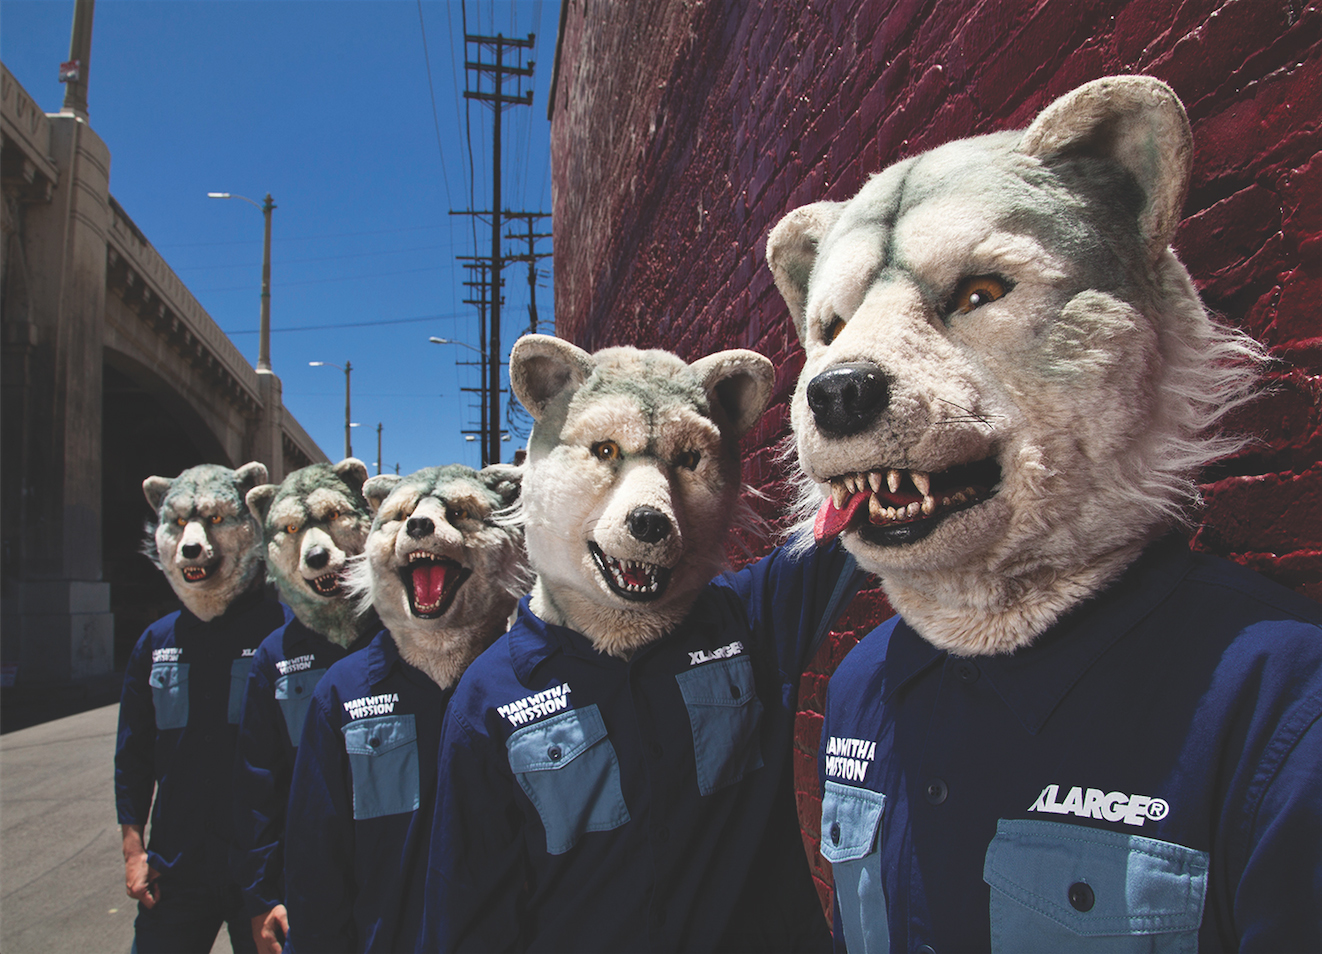 XLARGE × MAN WITH A MISSION   コラボ　キャップ帽子